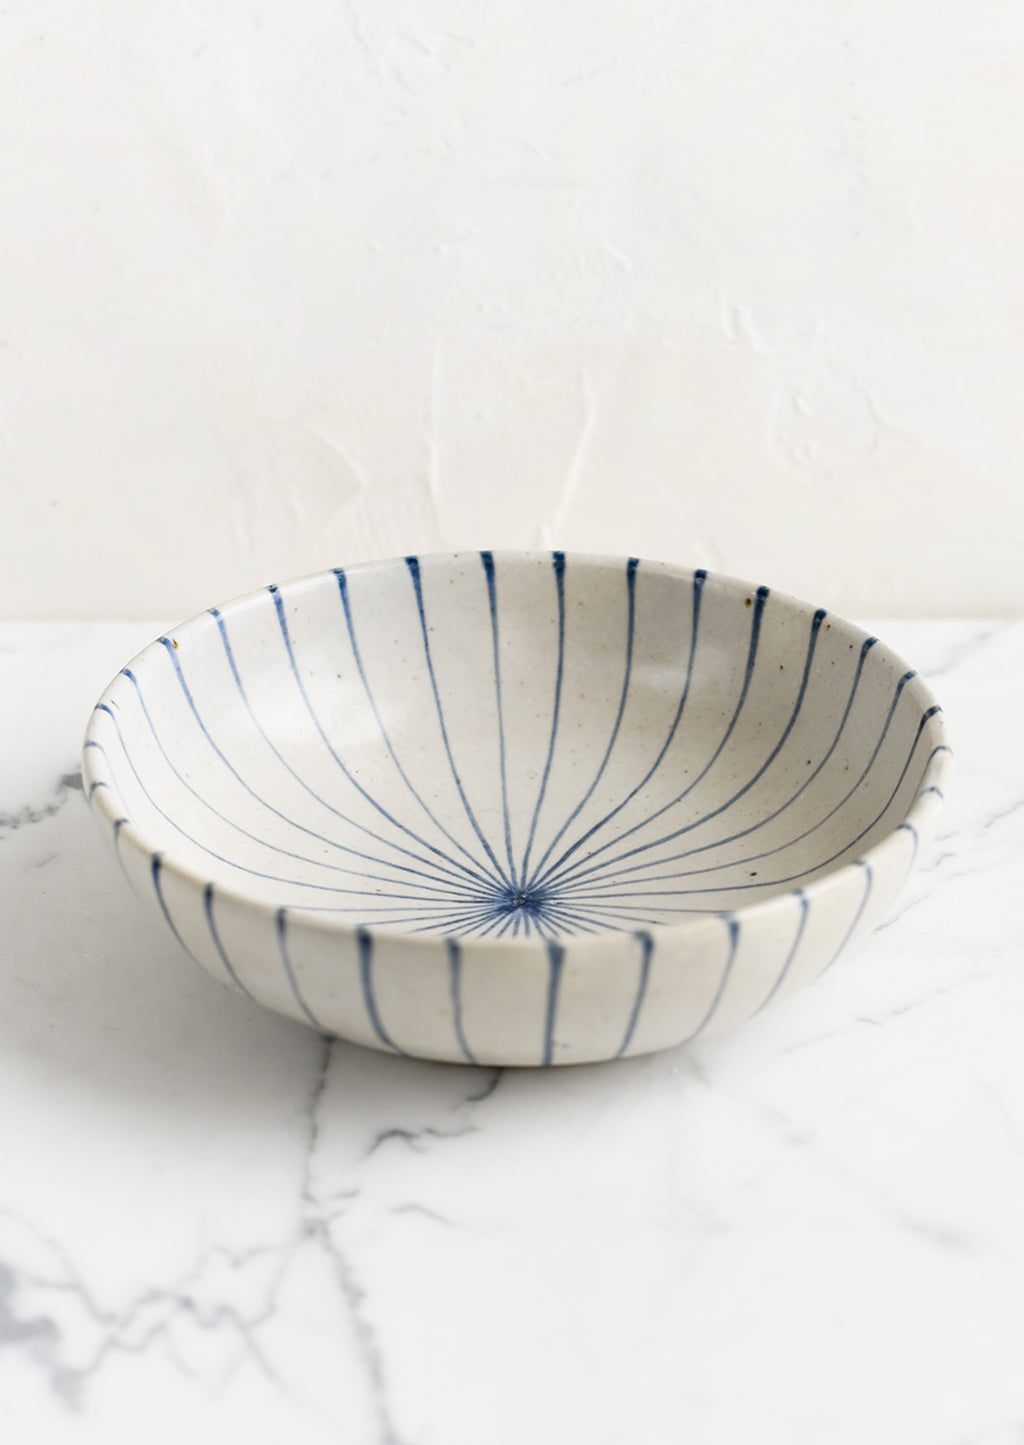 2: A round and shallow bowl in white with blue sunray pinstripe pattern.